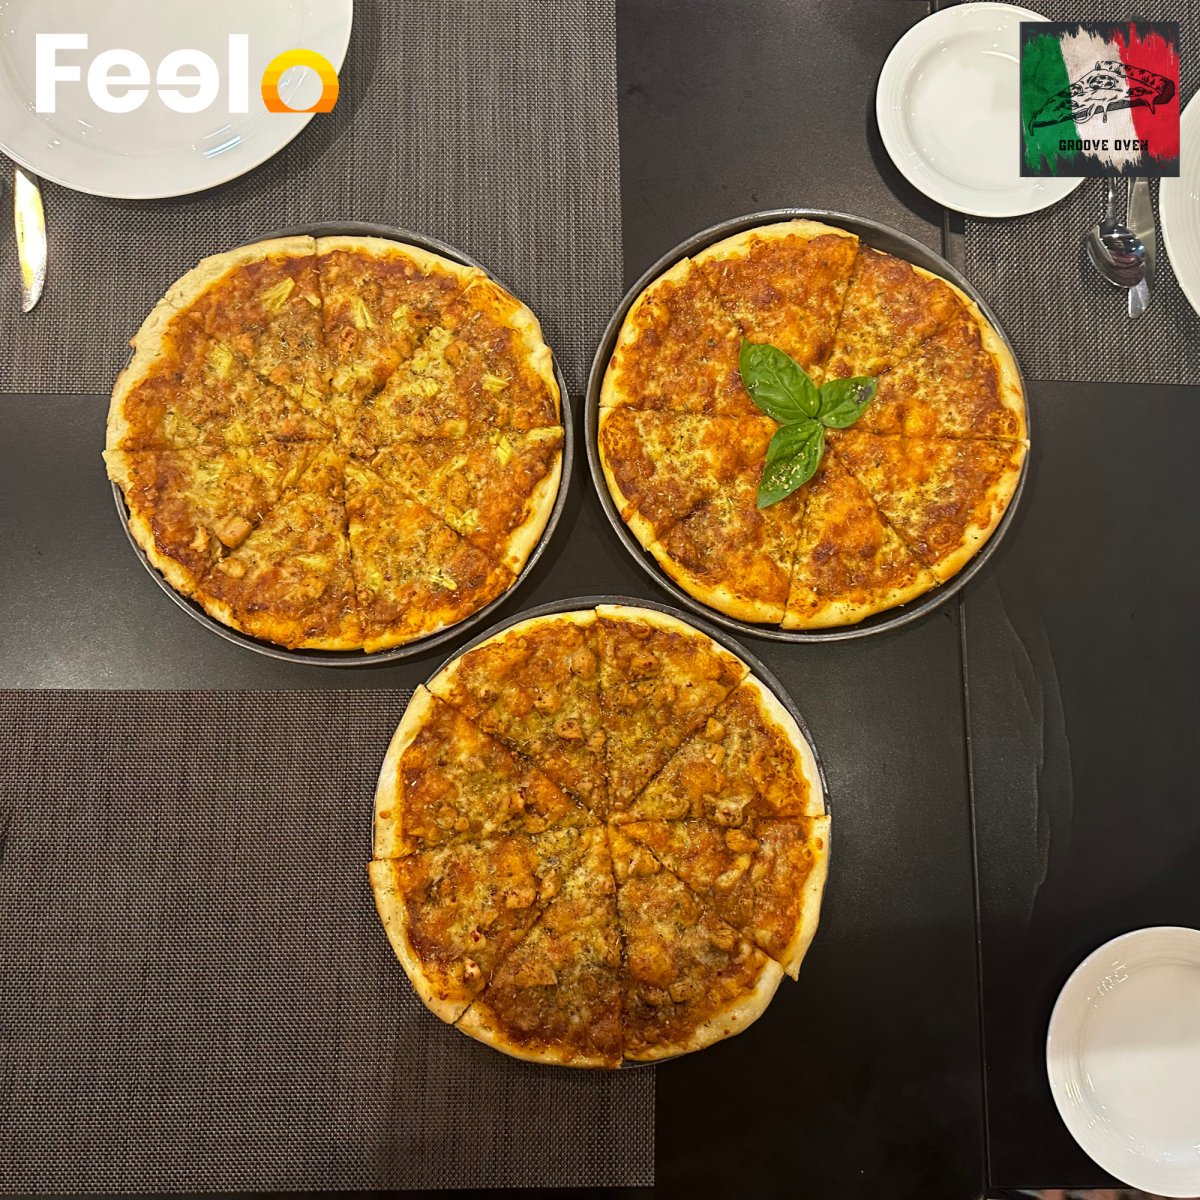 3x Large Pizzas (11 inch): 1x Margherita + 2x pizzas of your choice - Lemon Multi-Cuisine Restaurant (Groove Oven), Colombo 02 | Feelo